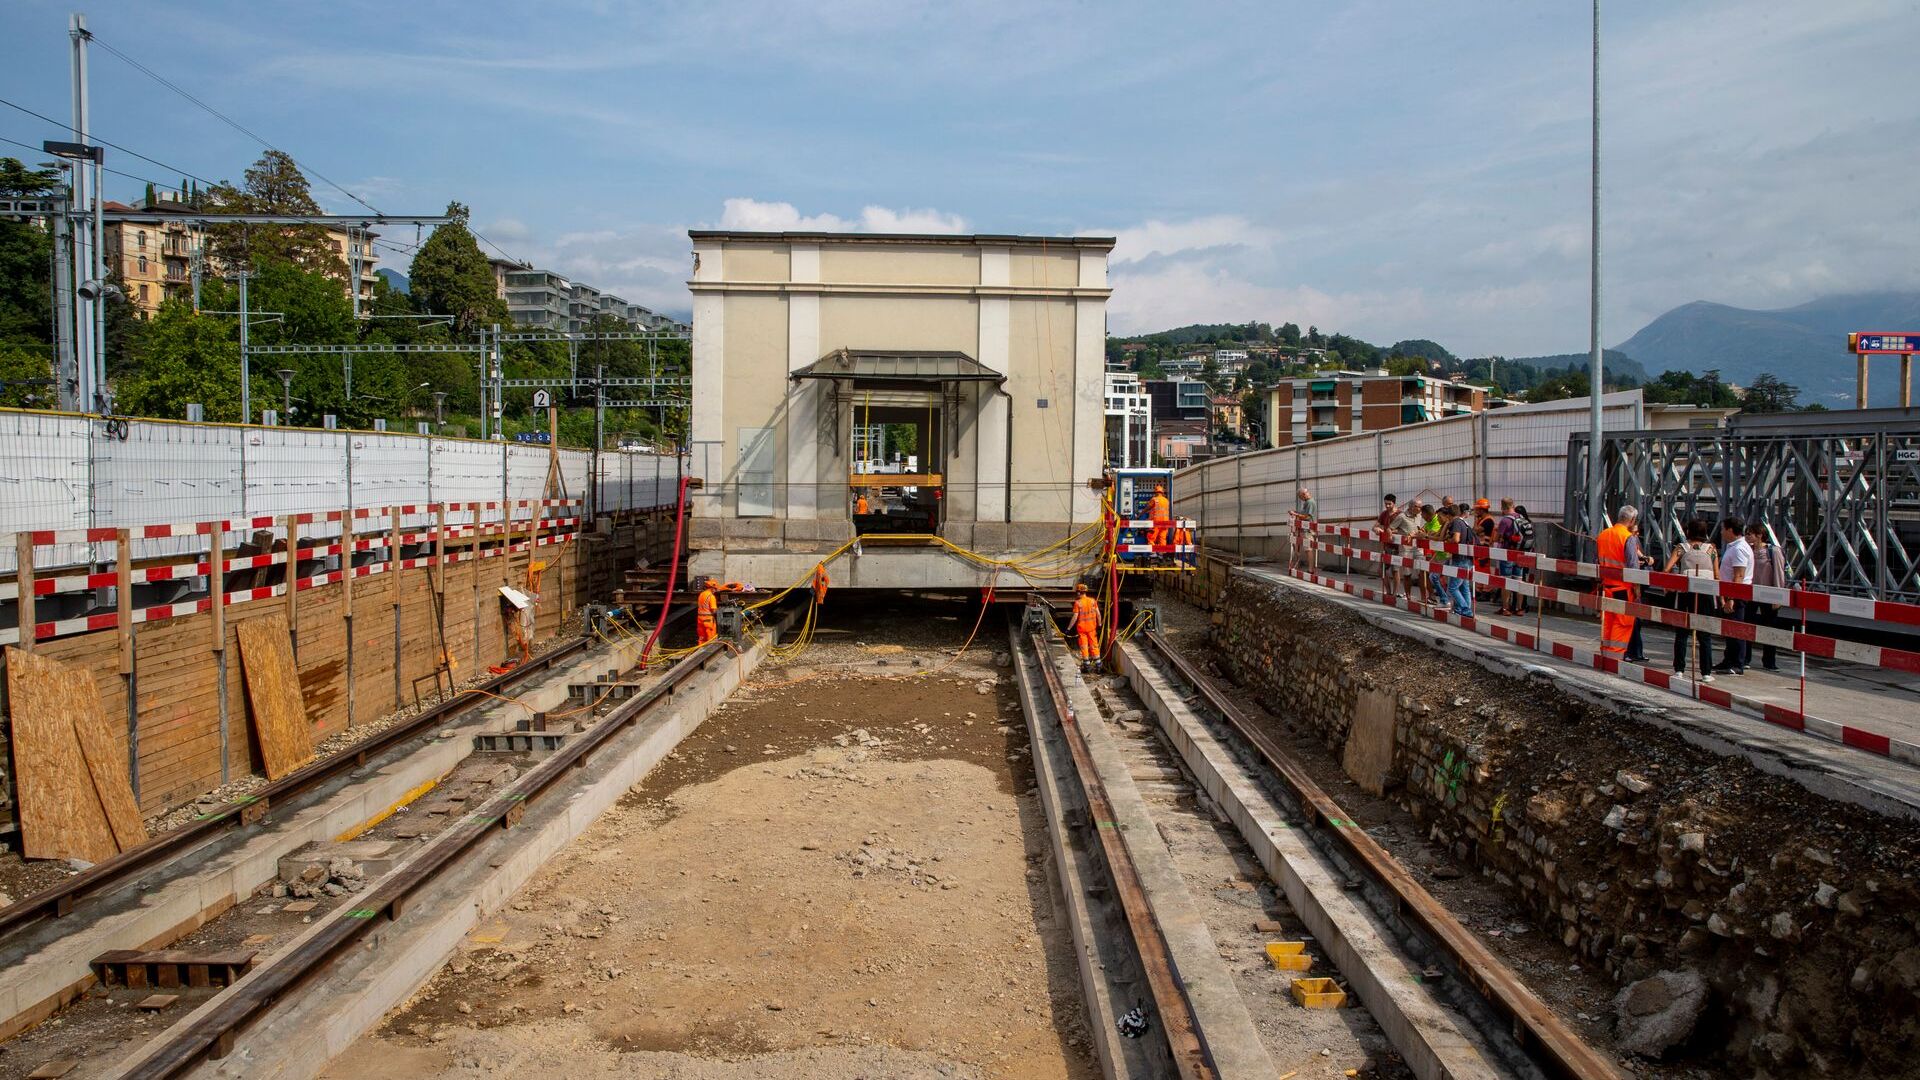 The construction site of the new Lugano-Besso underpass and the relocation of the so-called "service building" of the SBB CFF FFS station